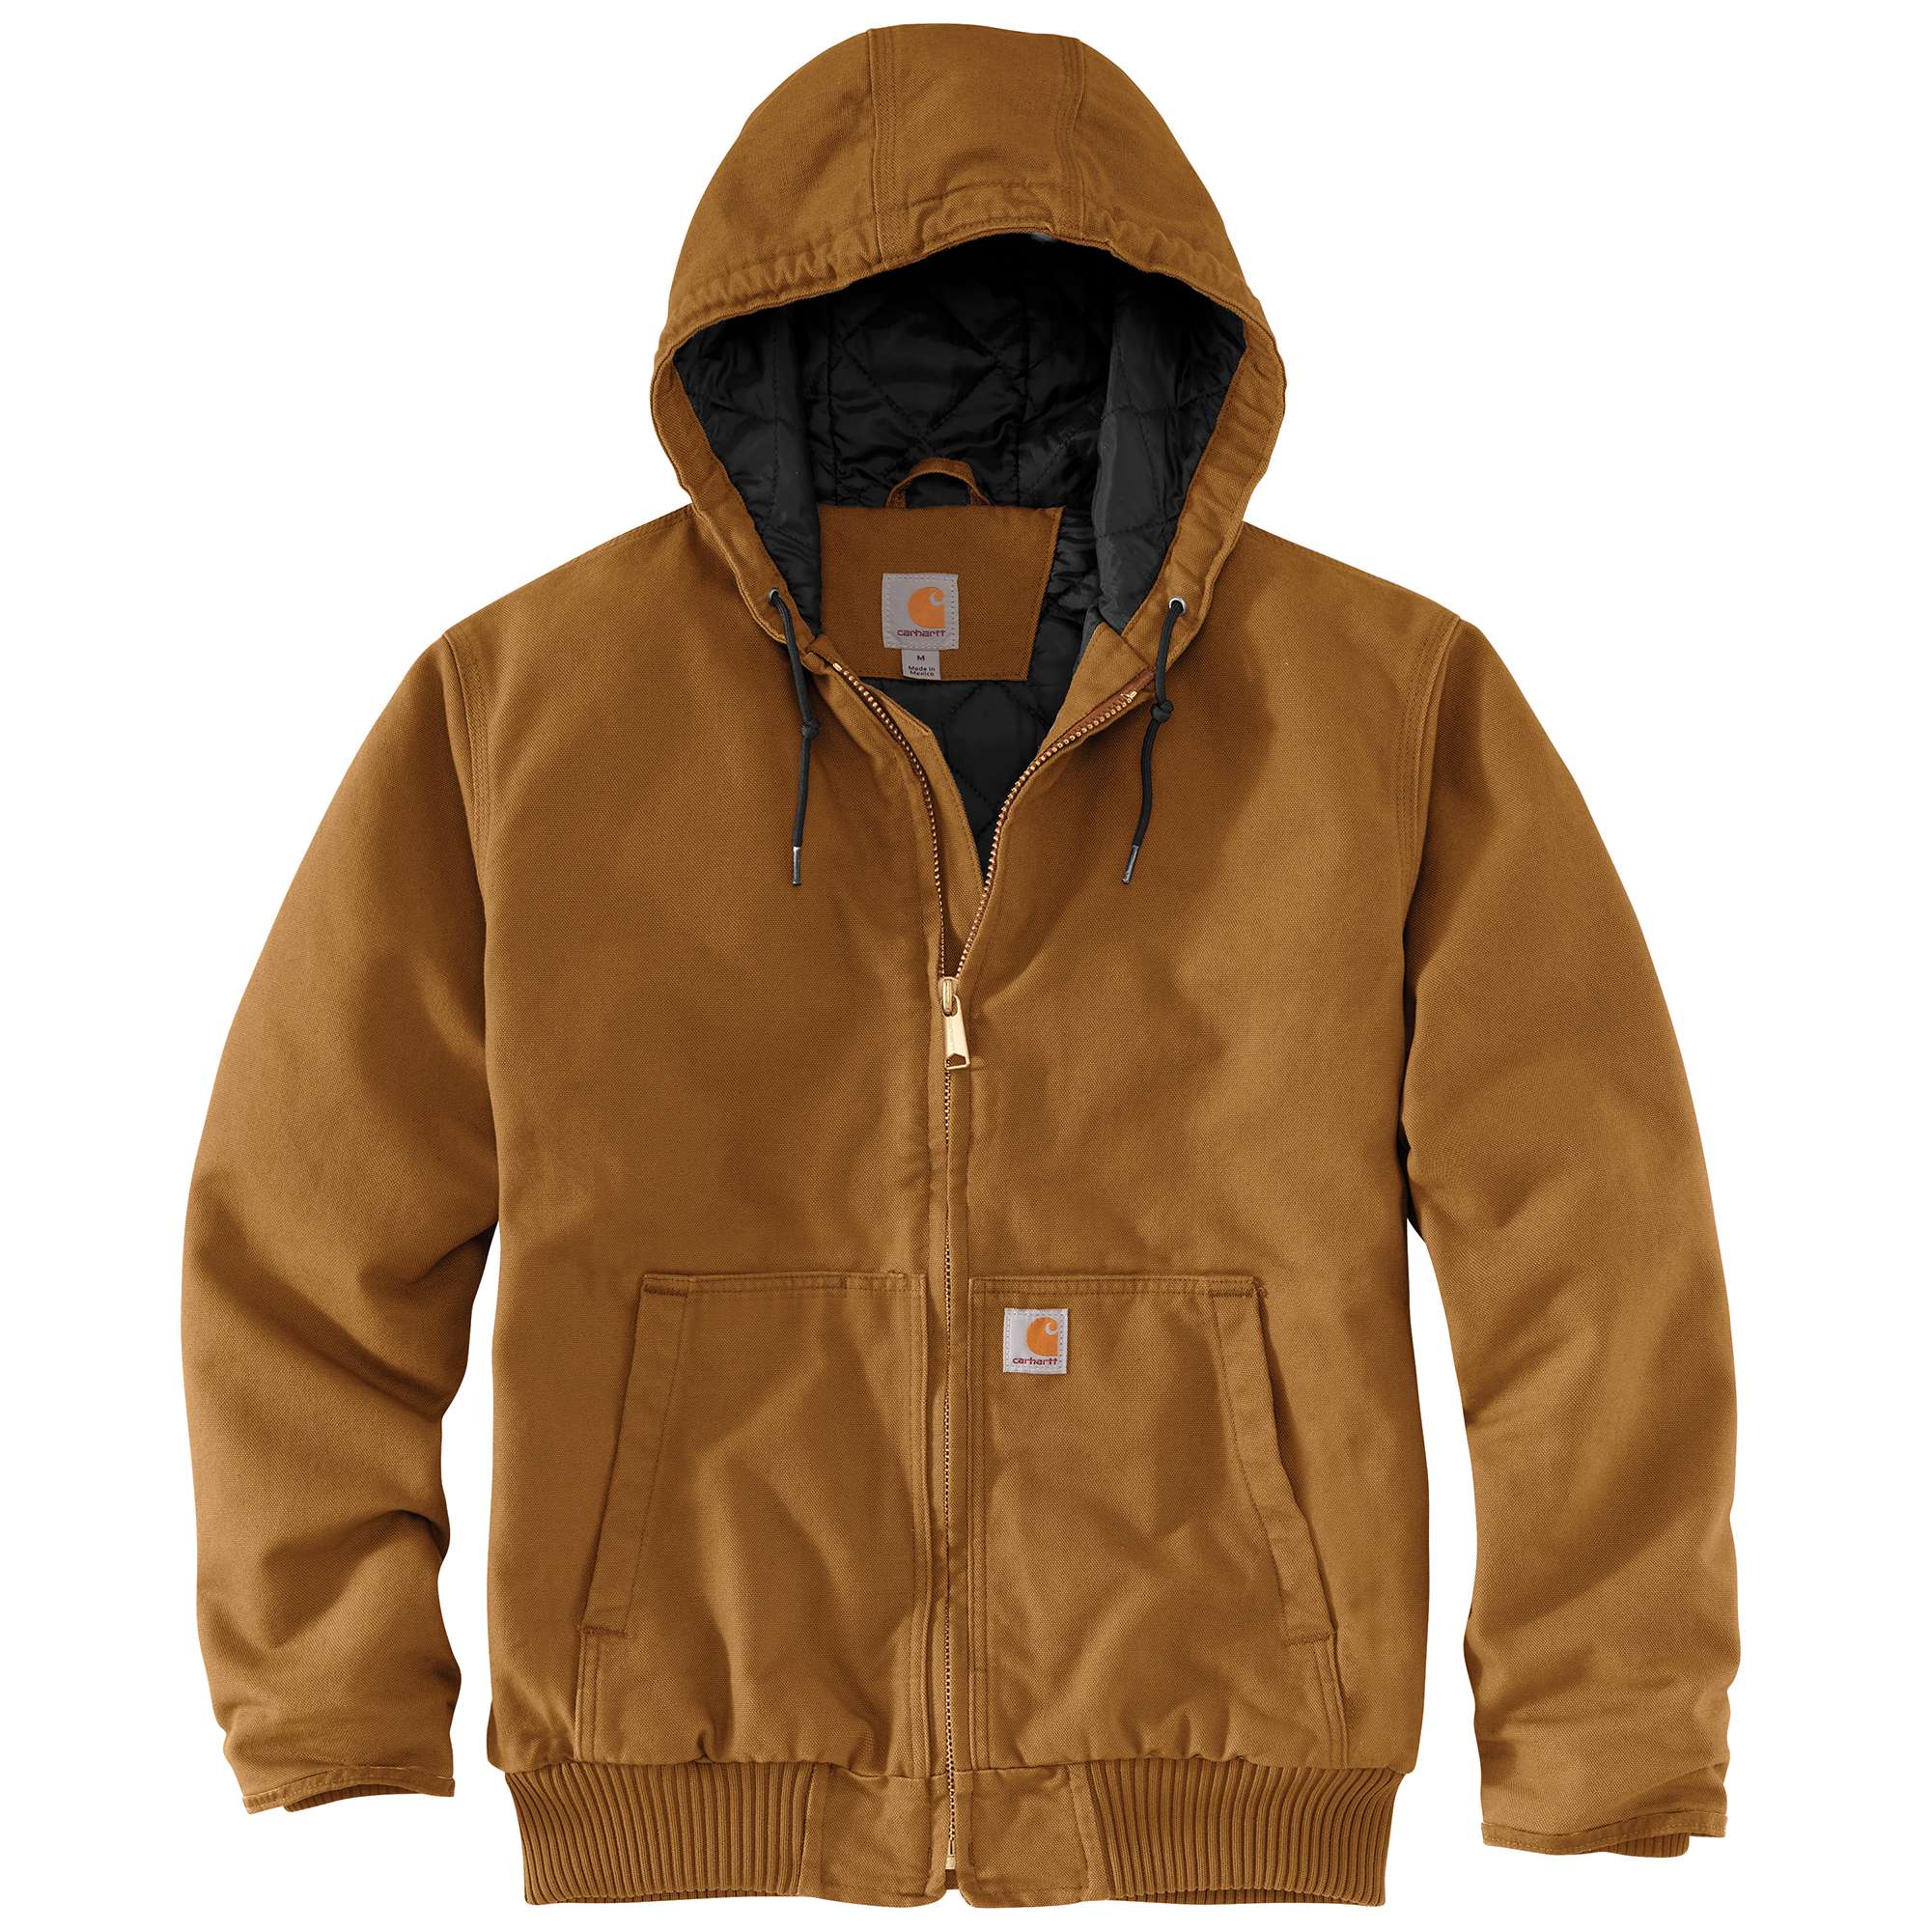 Carhartt - Rain Defender or Storm Defender? Rain Defender is built with  durable, water repellent tech that forces water to bead up and roll off.  Storm Defender is built with waterproof, breathable